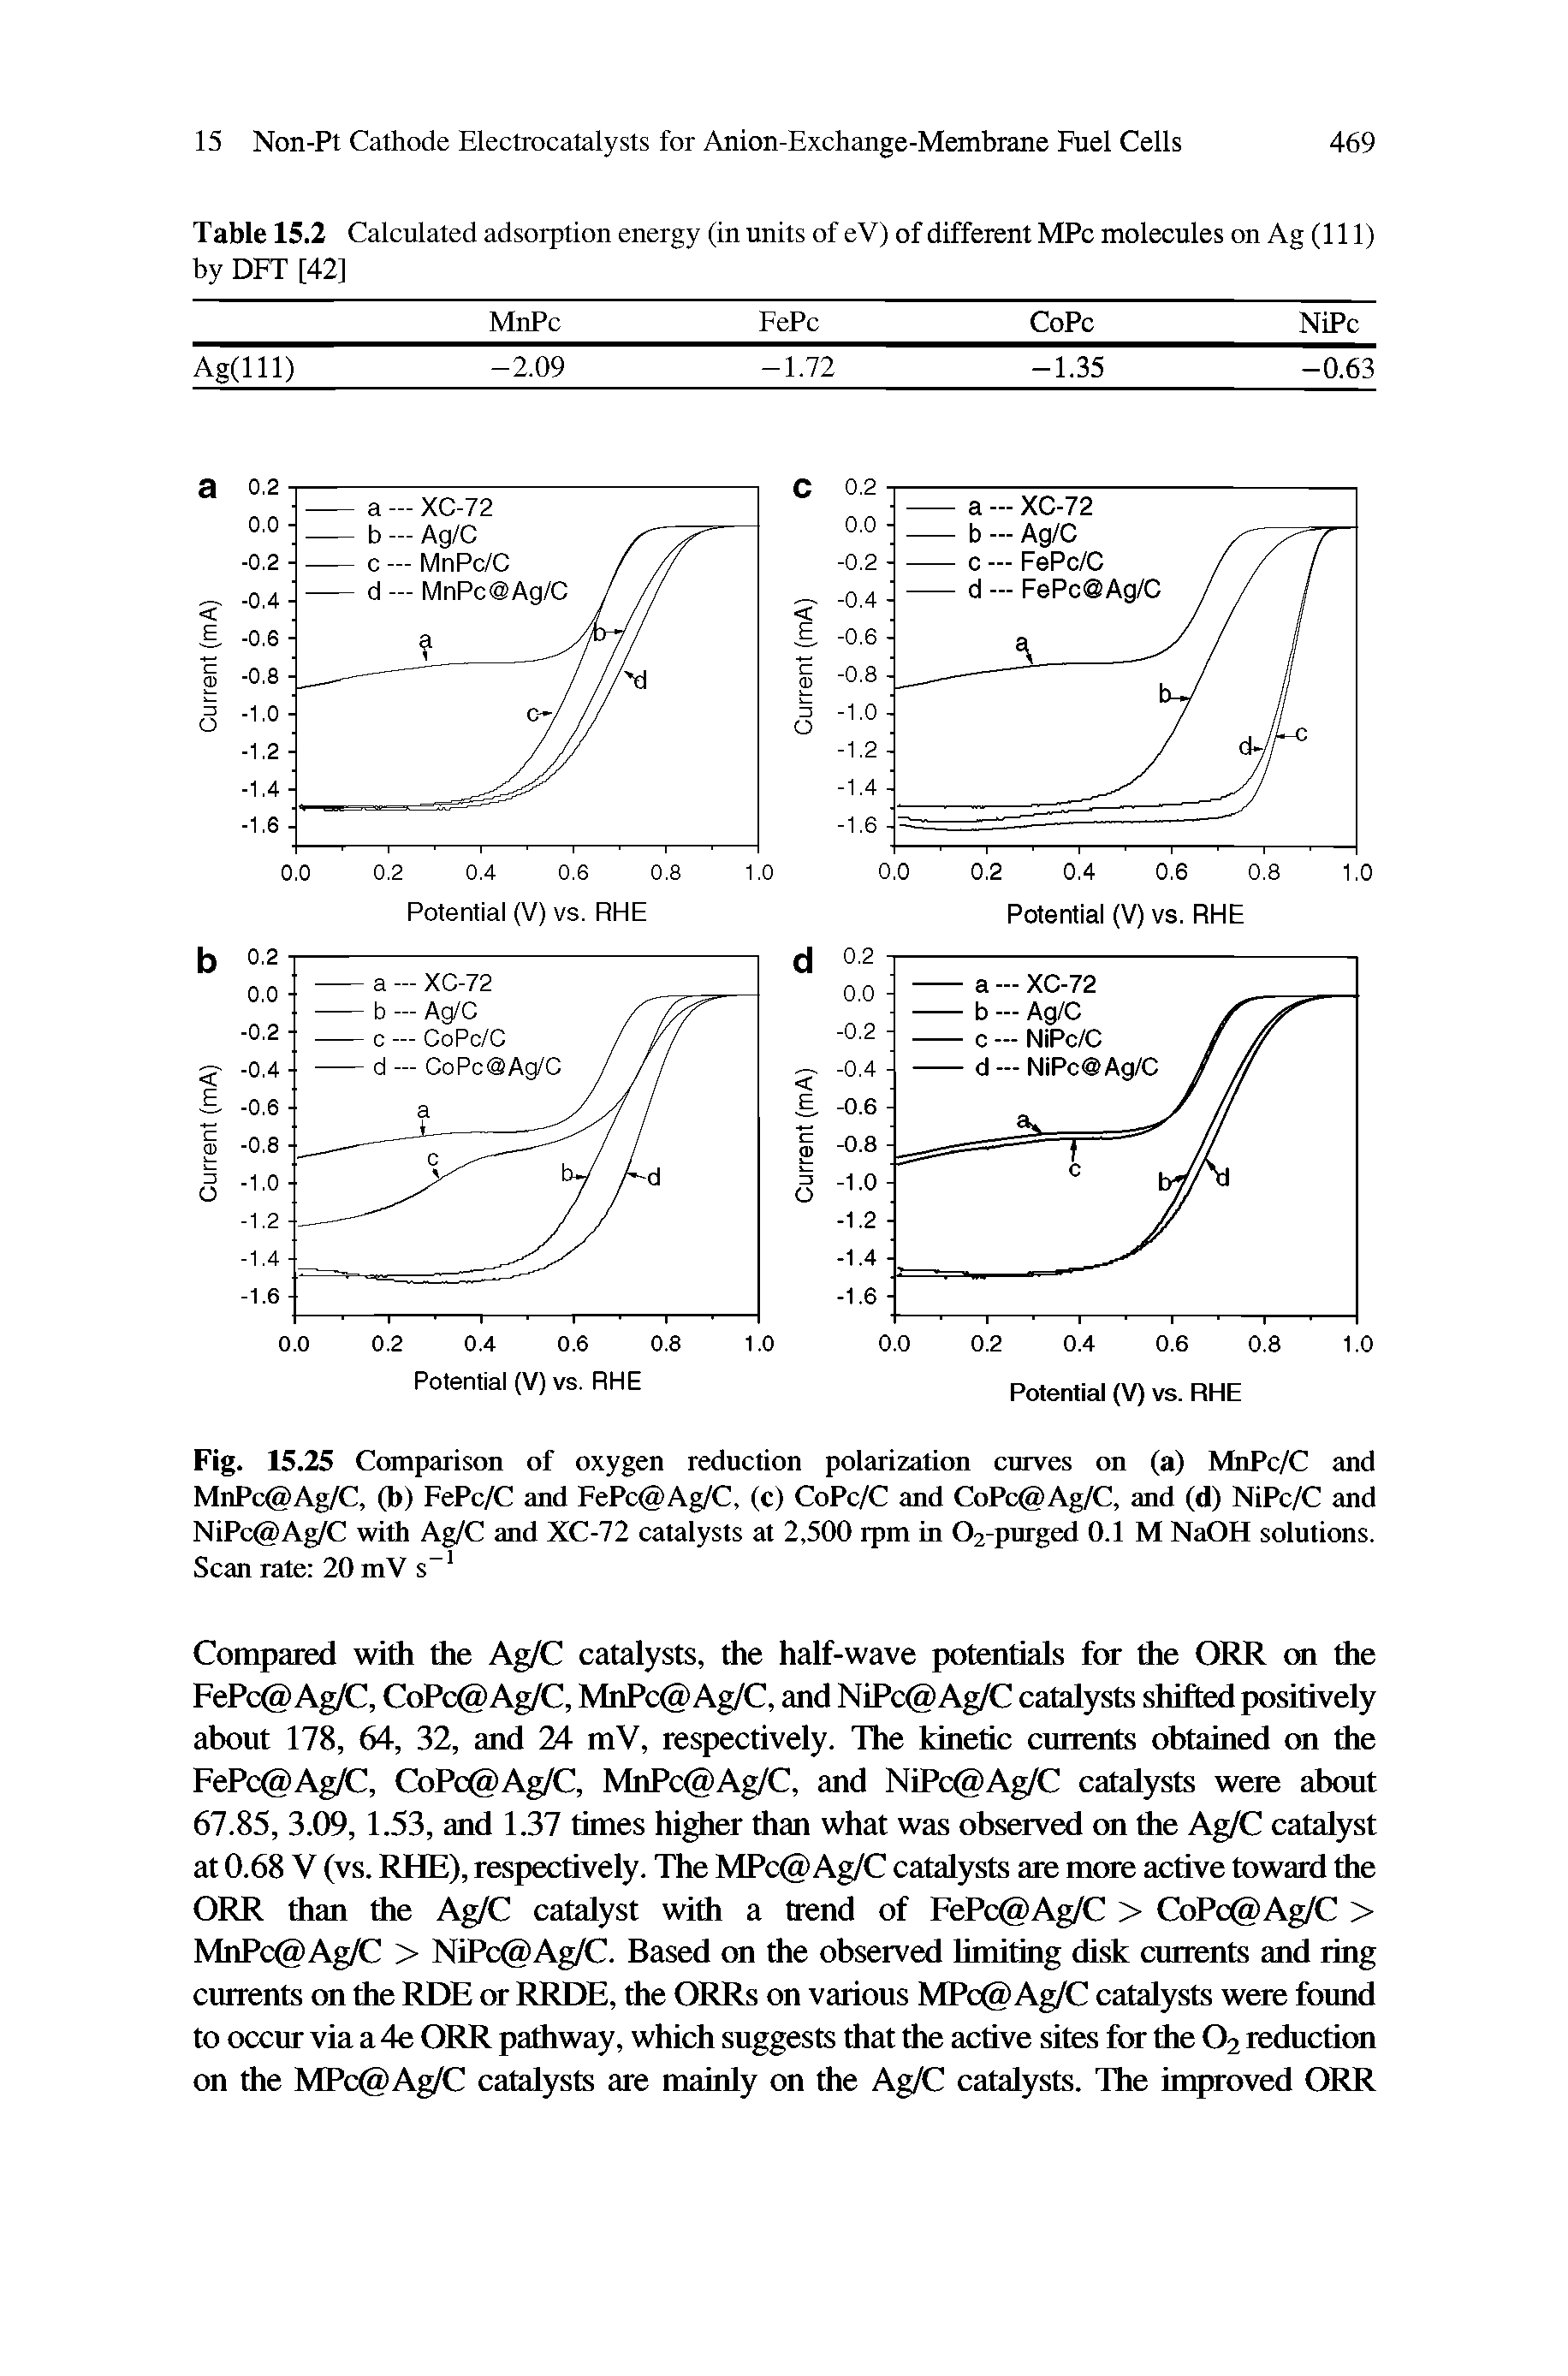 Fig. 15.25 Comparison of oxygen reduction polarization curves on (a) MnPc/C and MnPc Ag/C, (b) FePc/C and FePc Ag/C, (c) CoPc/C and CoPc Ag/C, and (d) NiPc/C and NiPc Ag/C with Ag/C and XC-72 catalysts at 2,500 rpm in 02-purged 0.1 M NaOH solutions. Scan rate 20 mV s ...